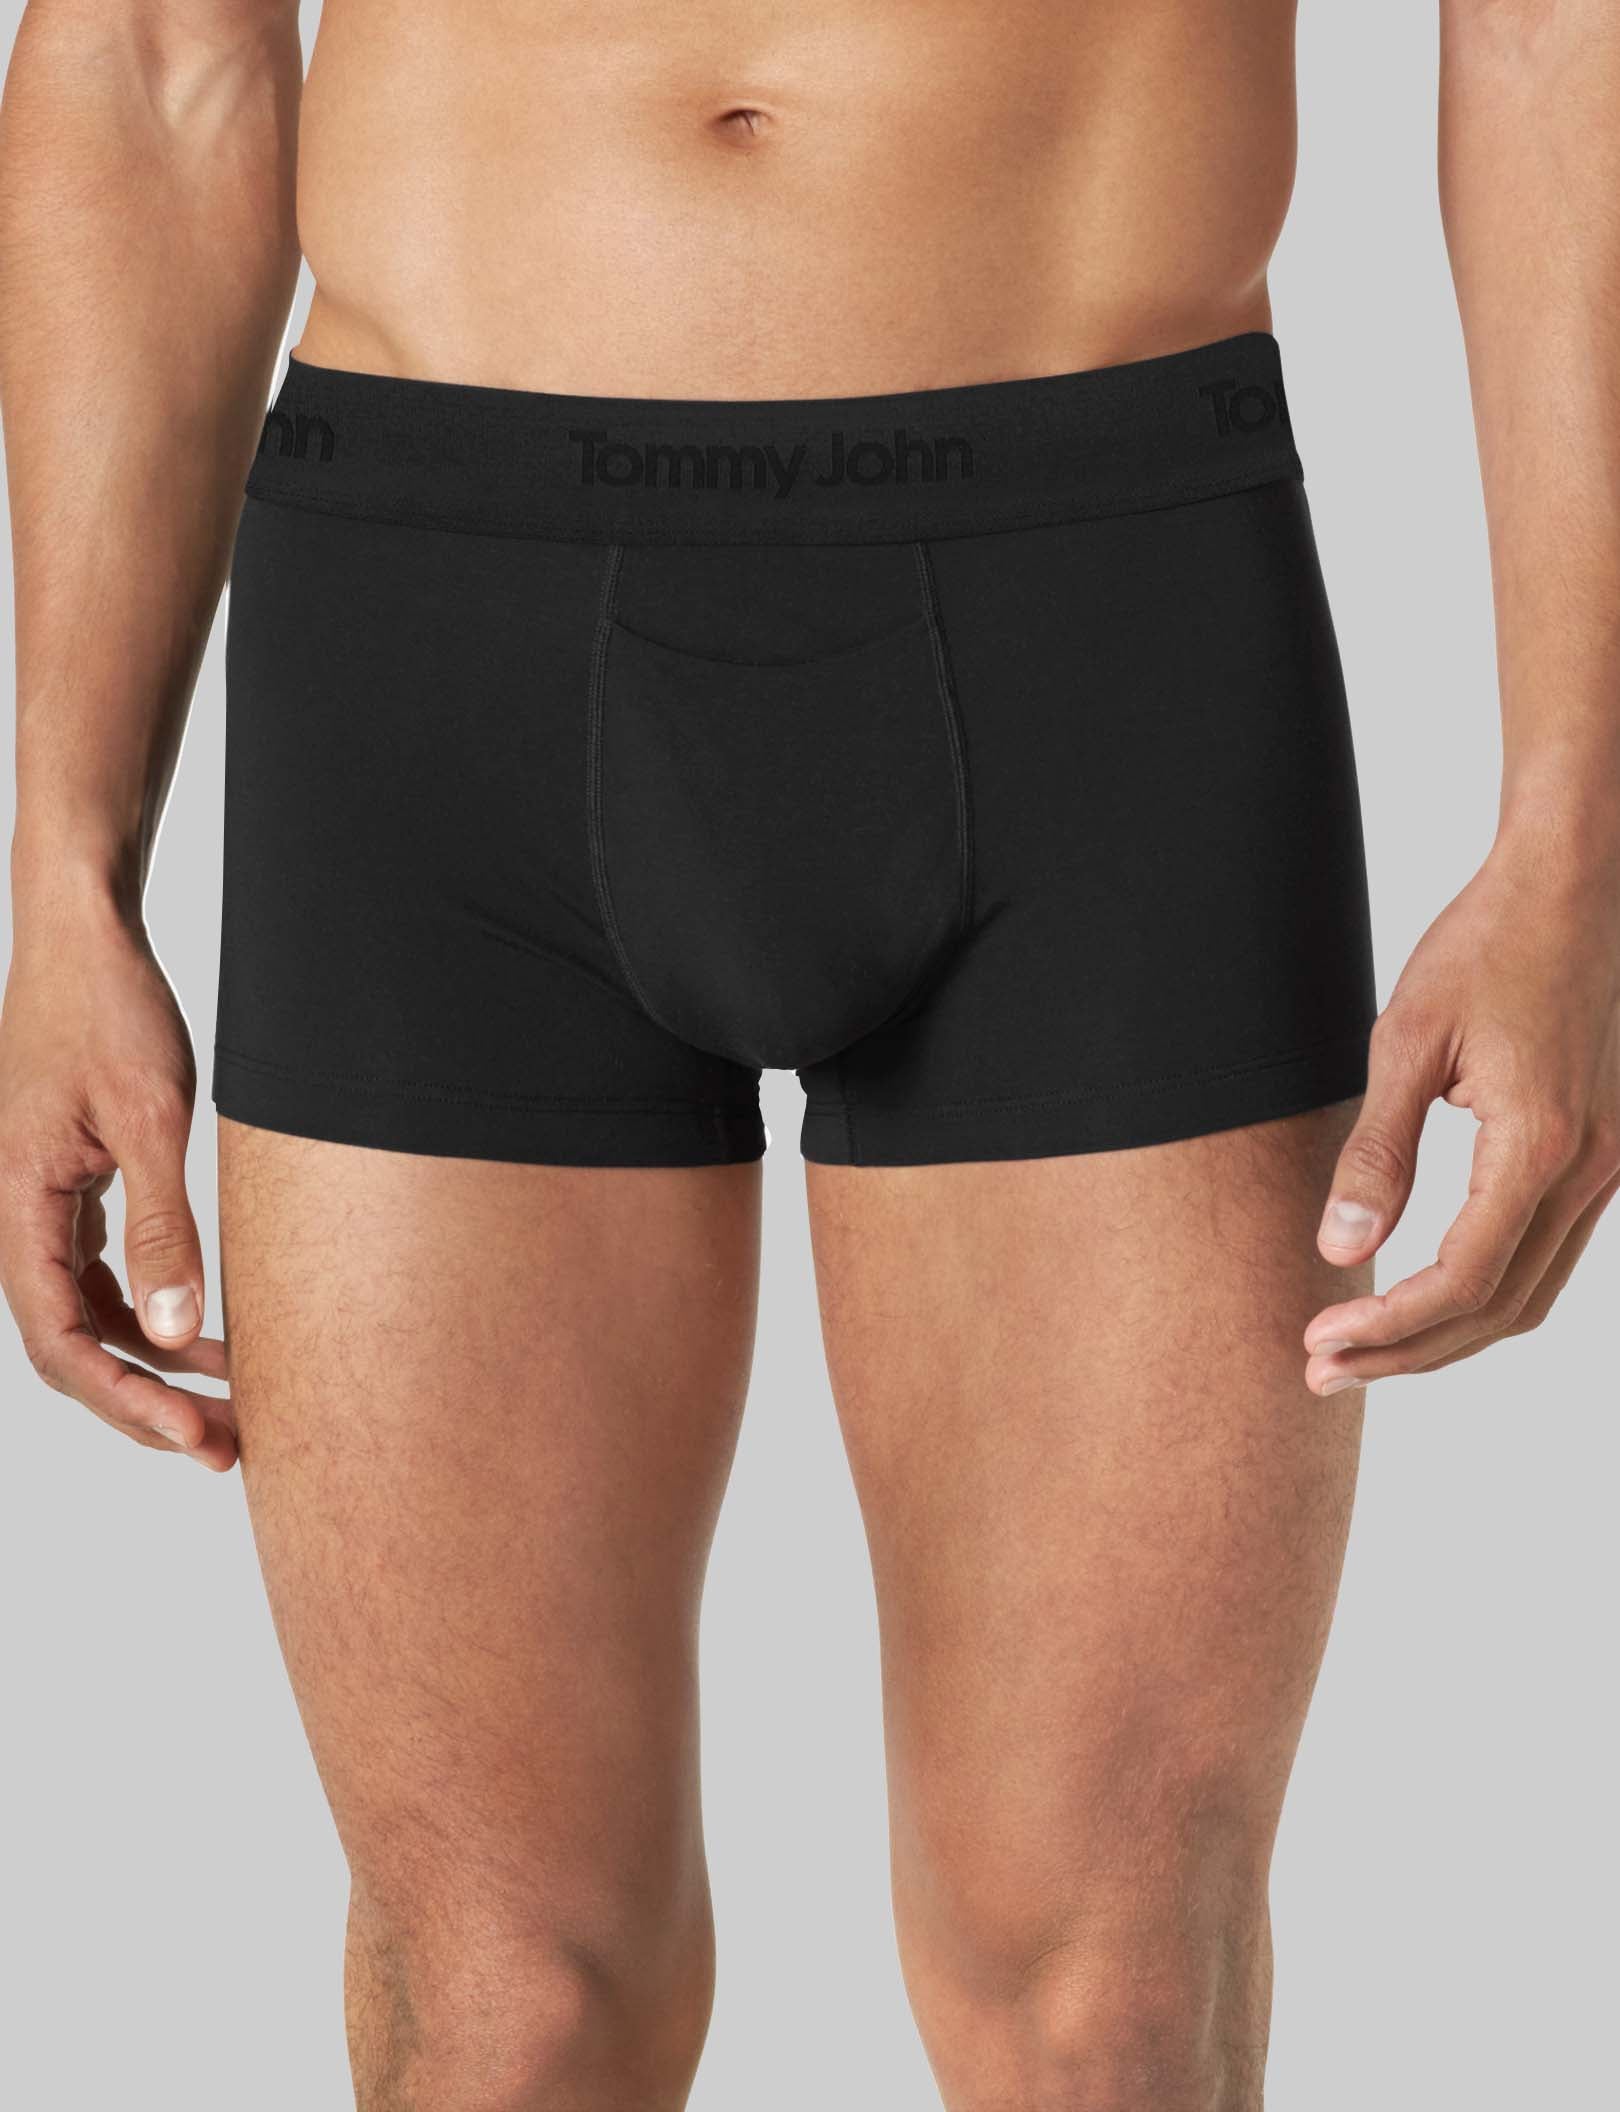 3 New Pairs of Tommy John Second Skin Boxer Briefs, Size XXL. MSRP